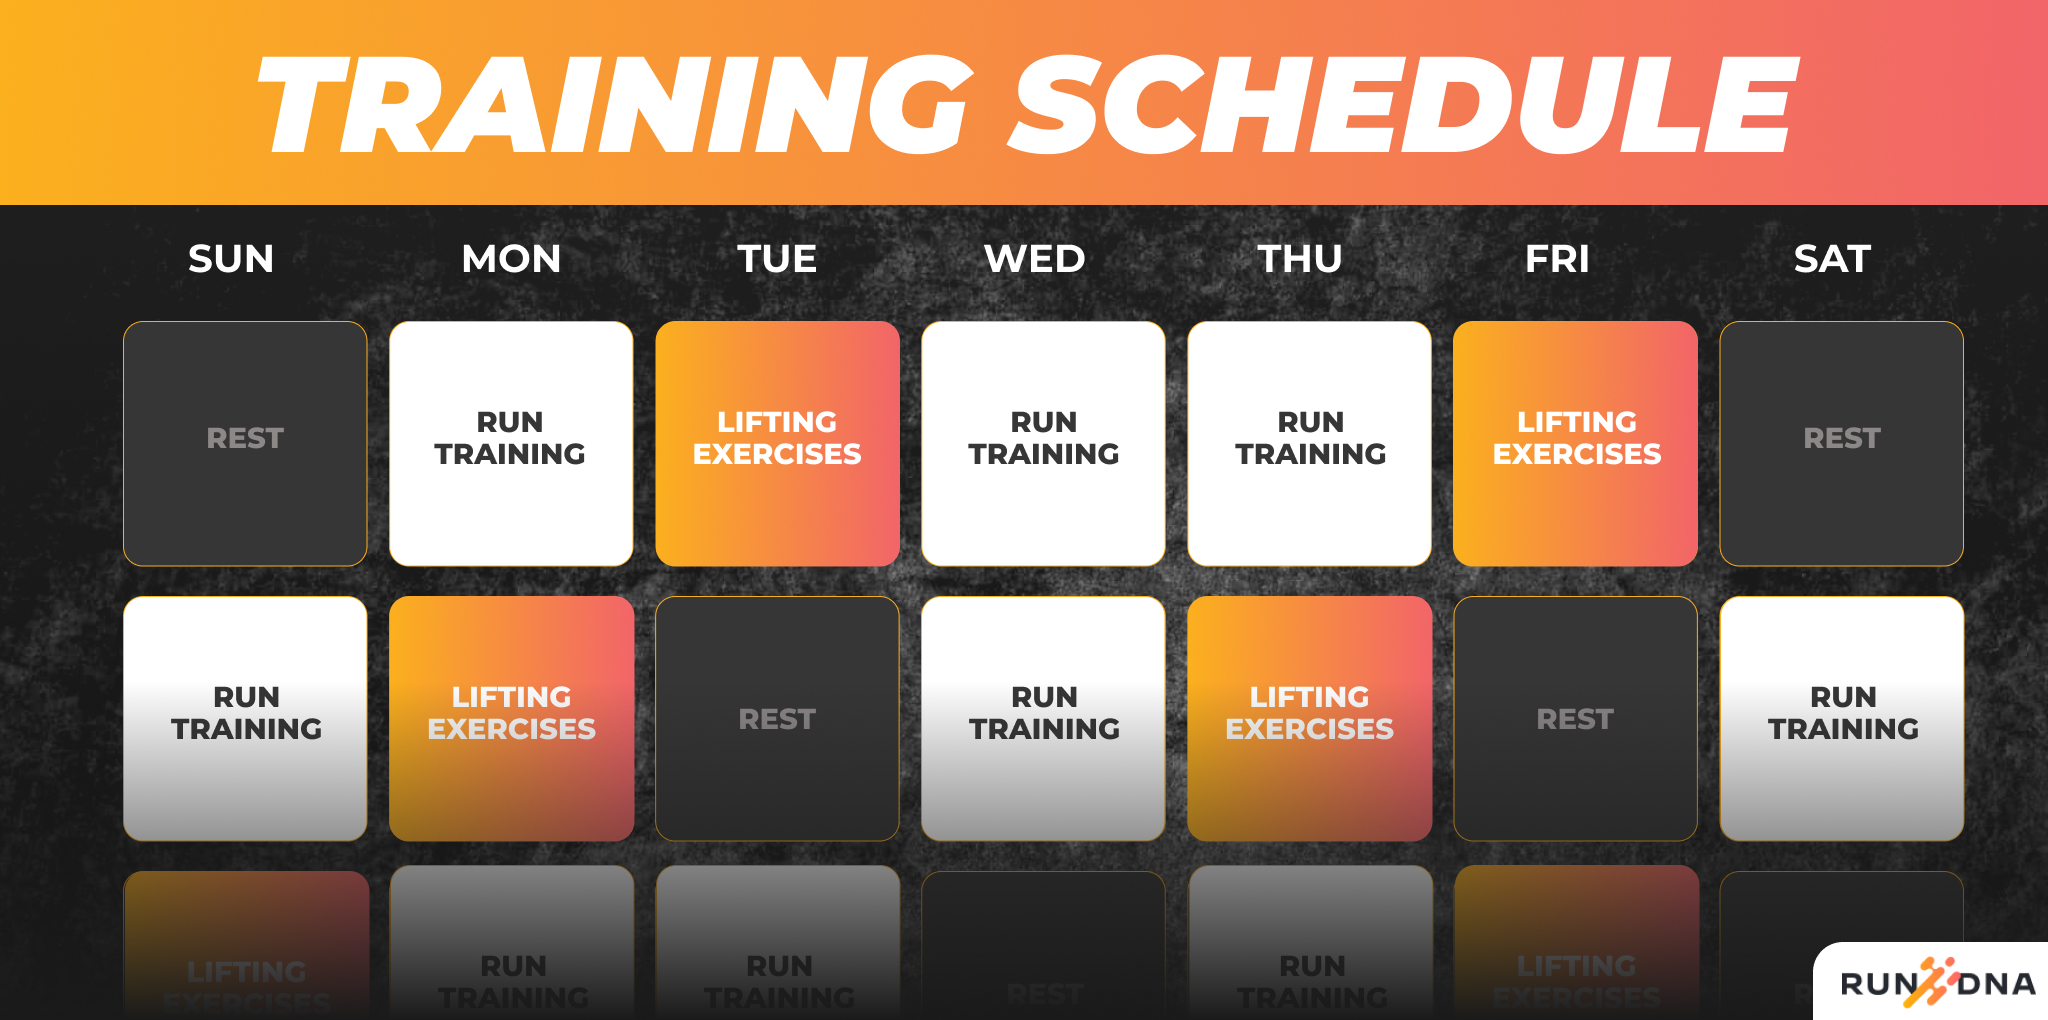 Training calendar showing a balanced schedule of running and lifting exercises for optimal performance.